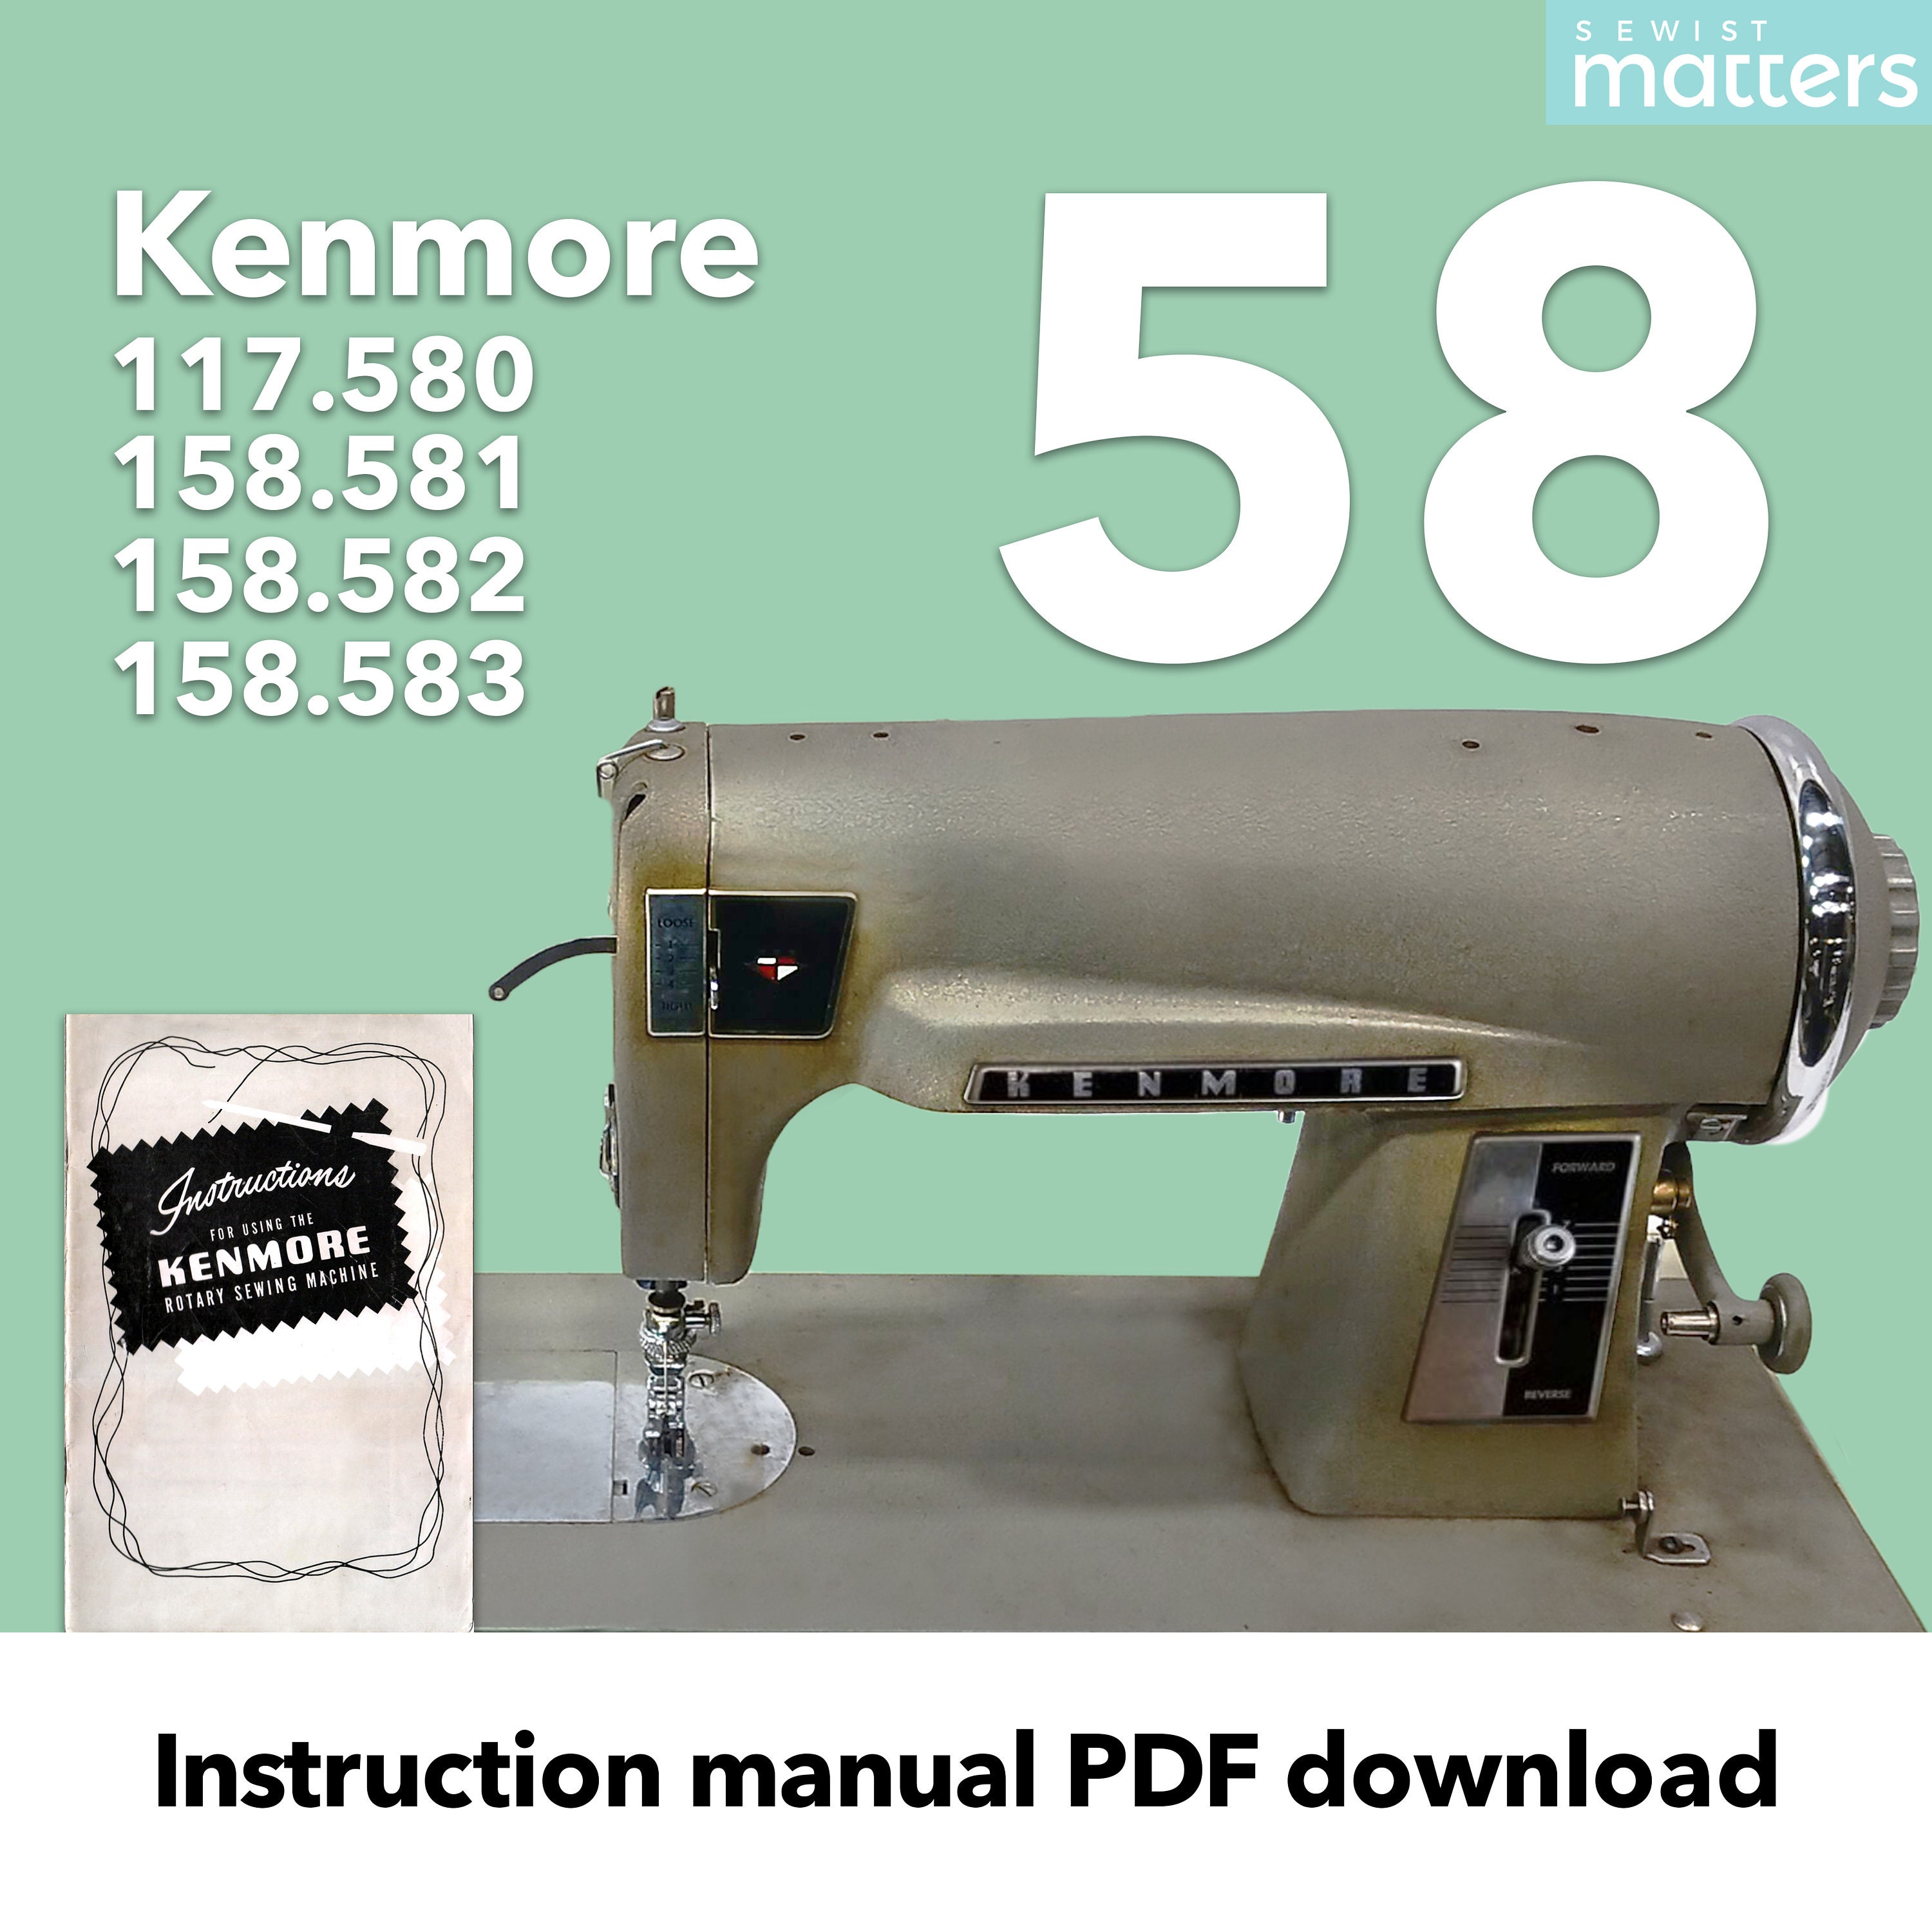 Buy the Vintage Kenmore Sewing Machine 117812 Deluxe Rotary 65